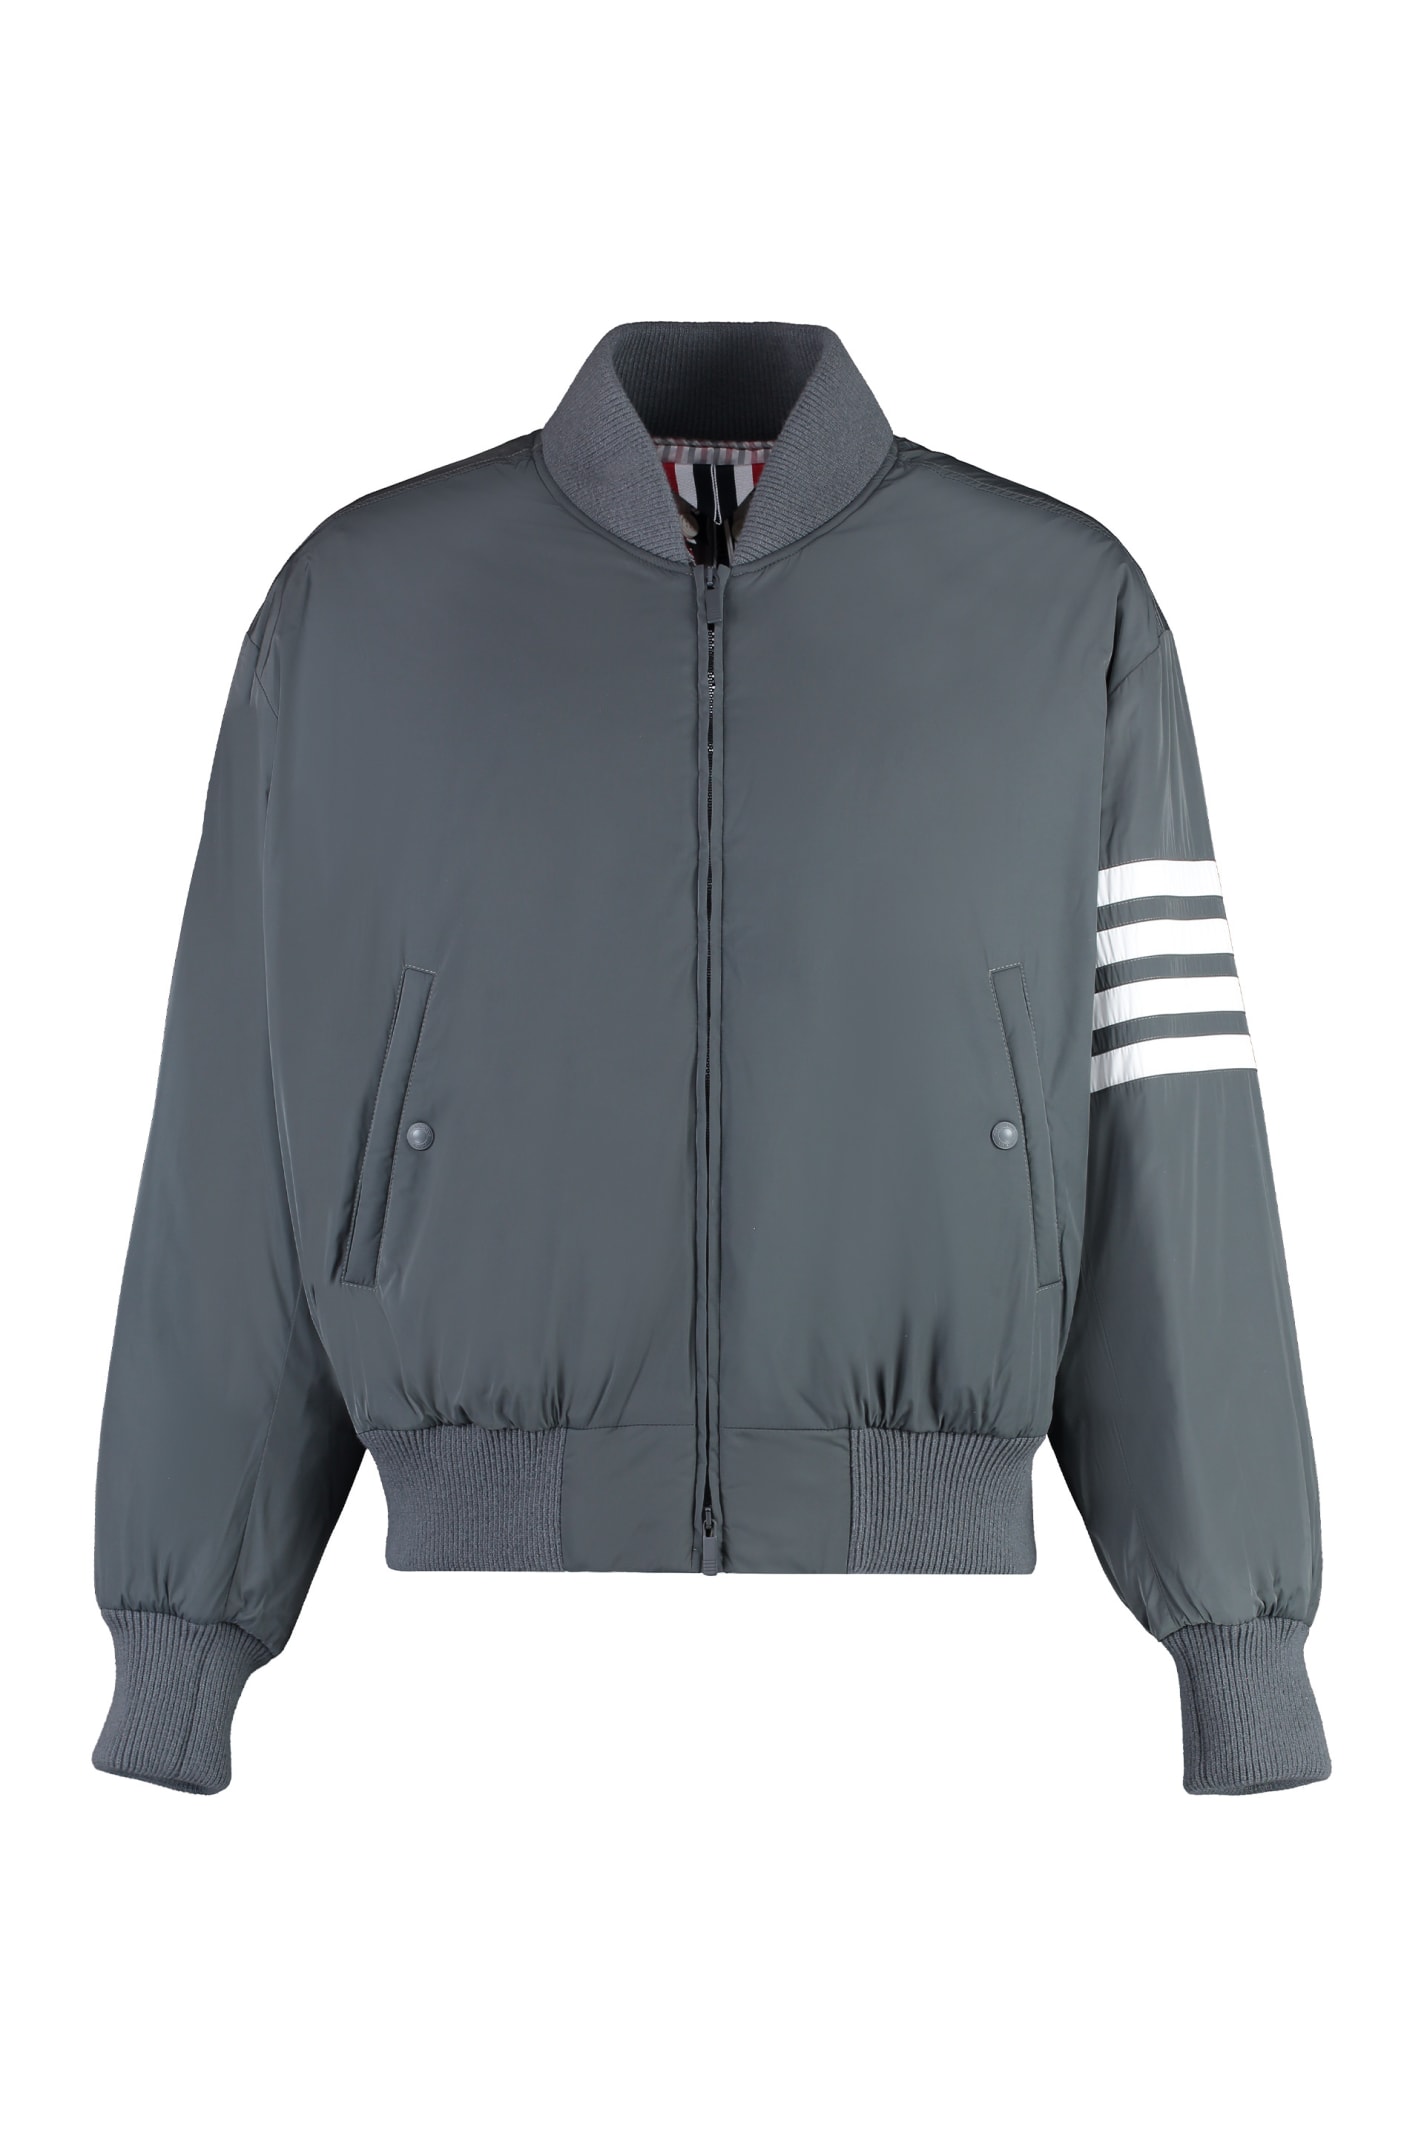 THOM BROWNE BOMBER JACKET IN TECHNICAL FABRIC